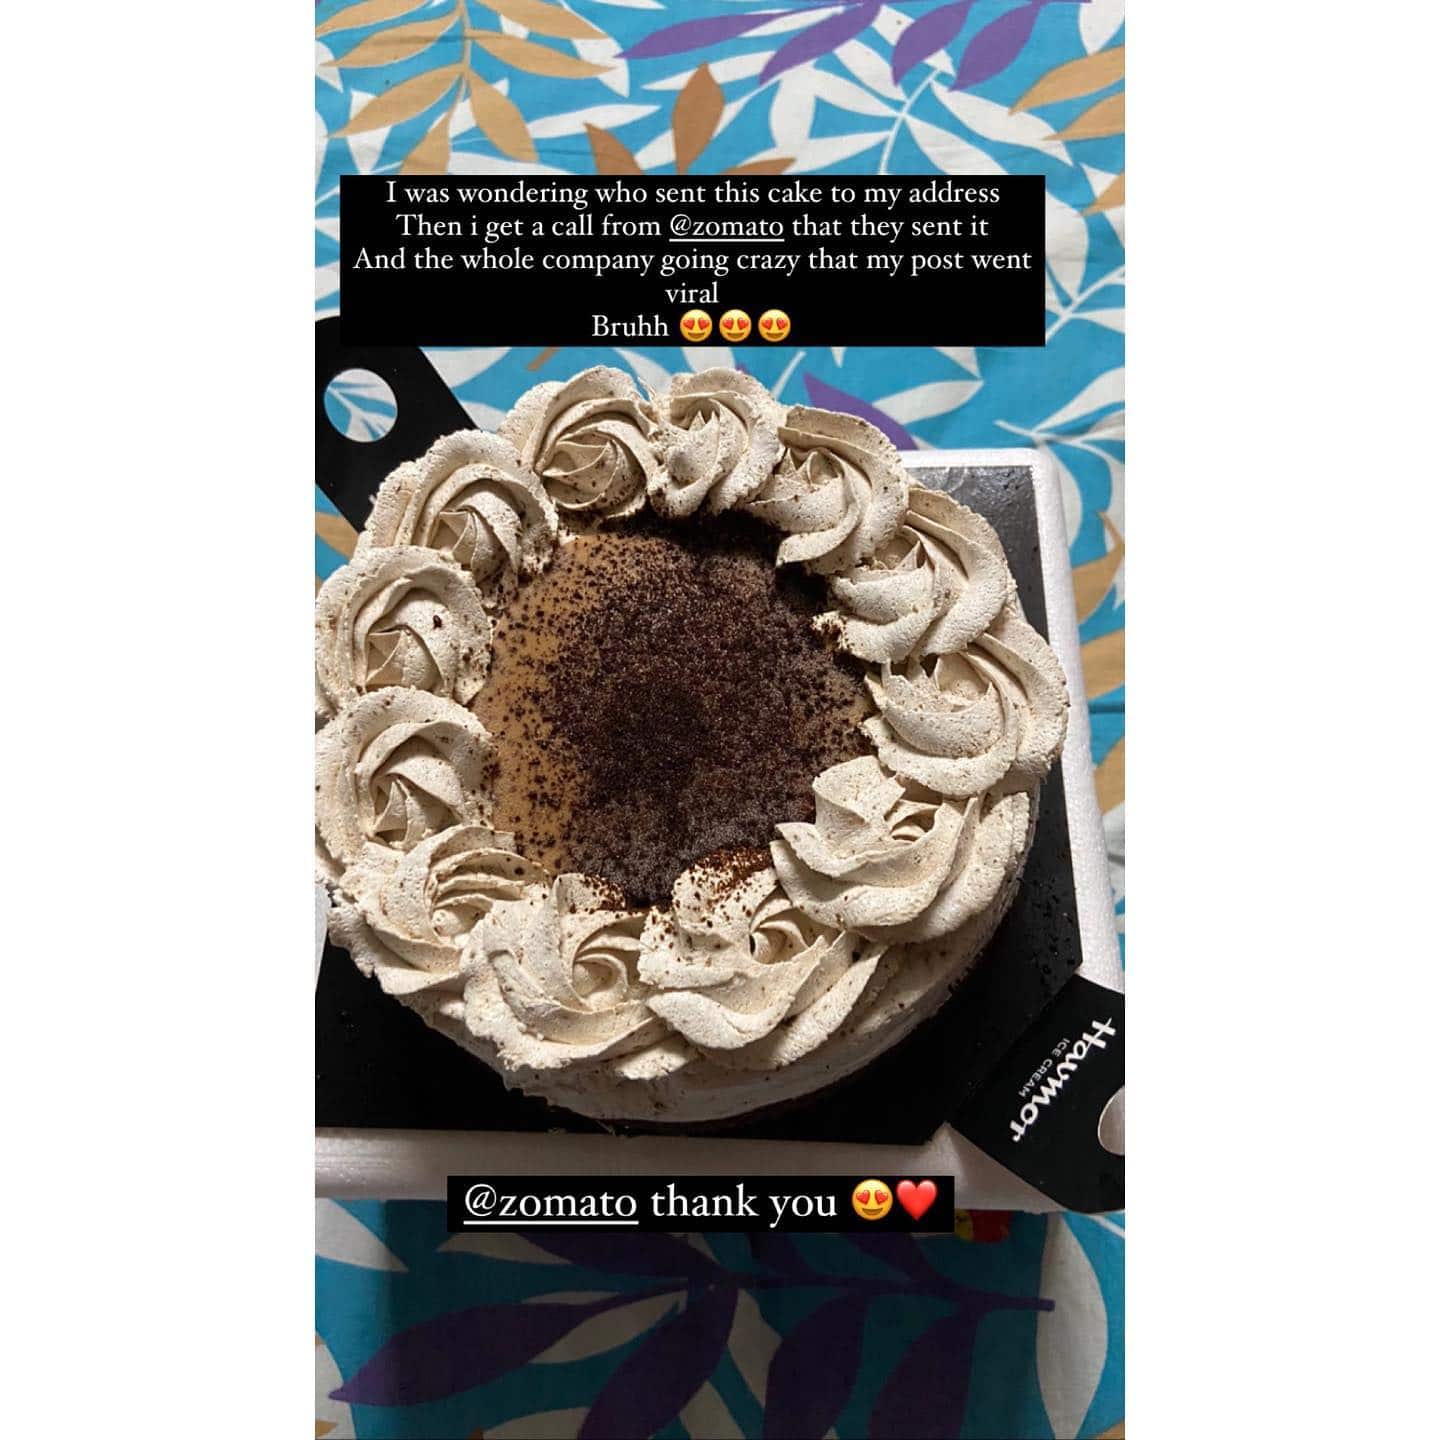 An Unfortunate Zomato Cake Ordering Mishap Is Shared By A Woman